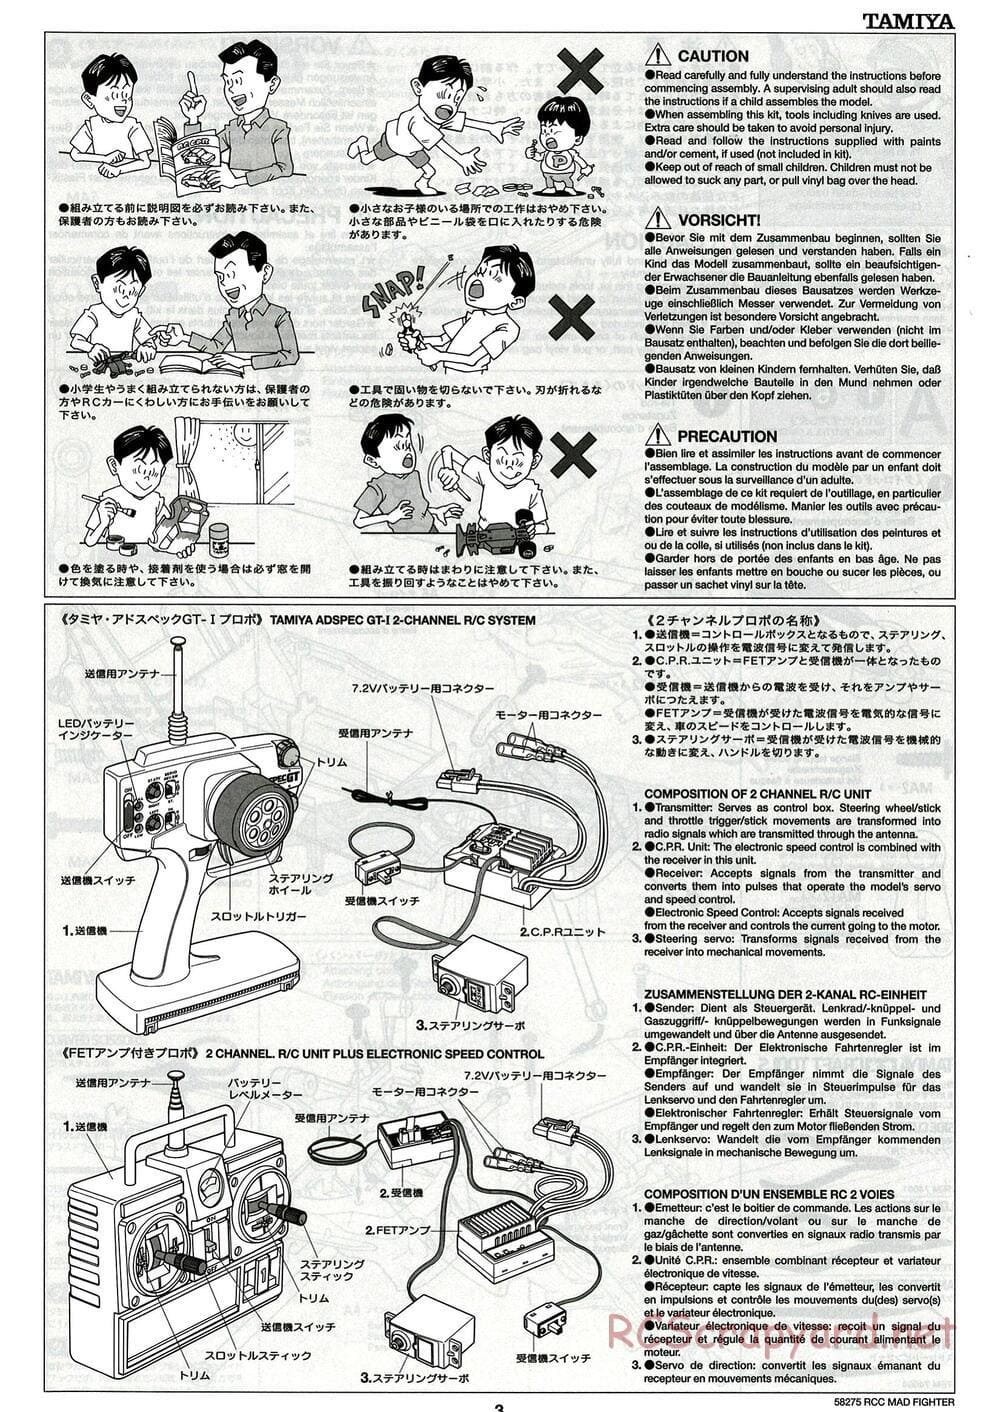 Tamiya - Mad Fighter Chassis - Manual - Page 3